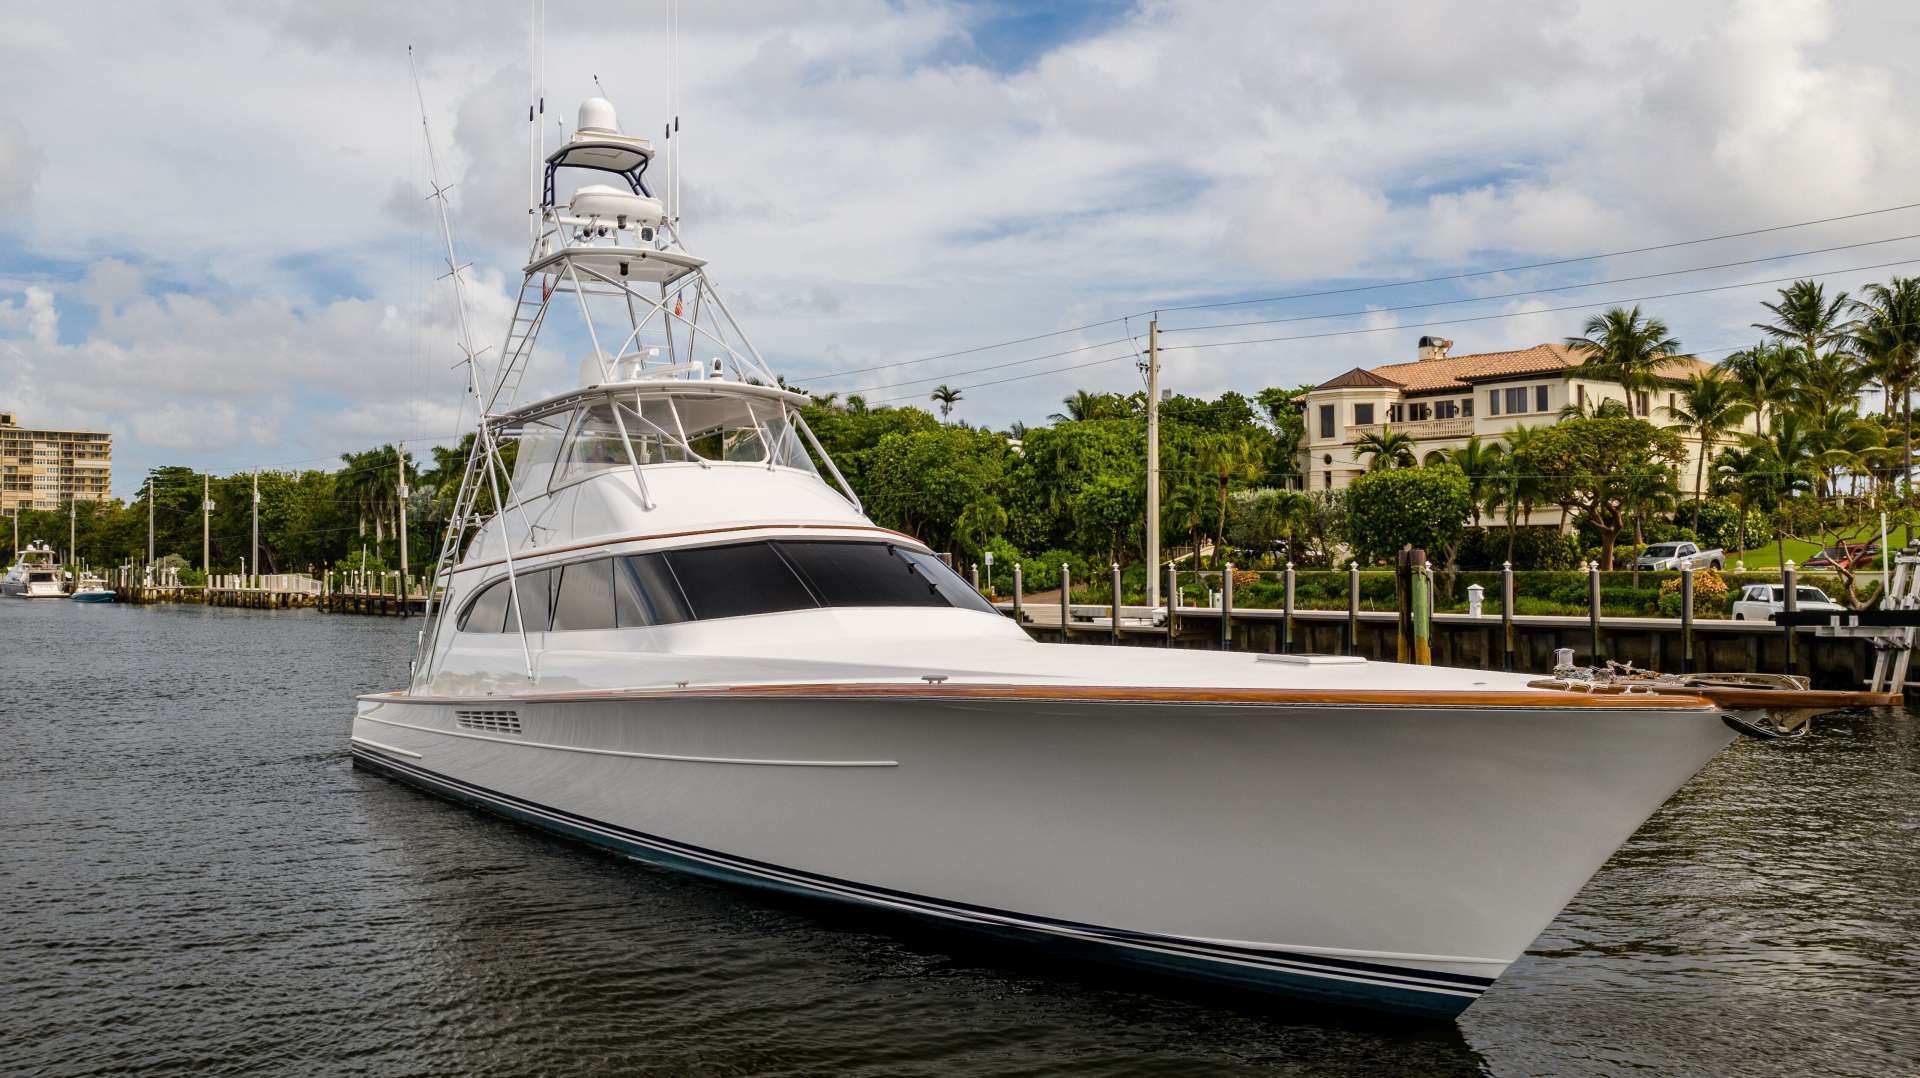 Reel Tight  - Yacht Charter Annapolis & Boat hire in US East Coast, Bahamas & Mexico 1